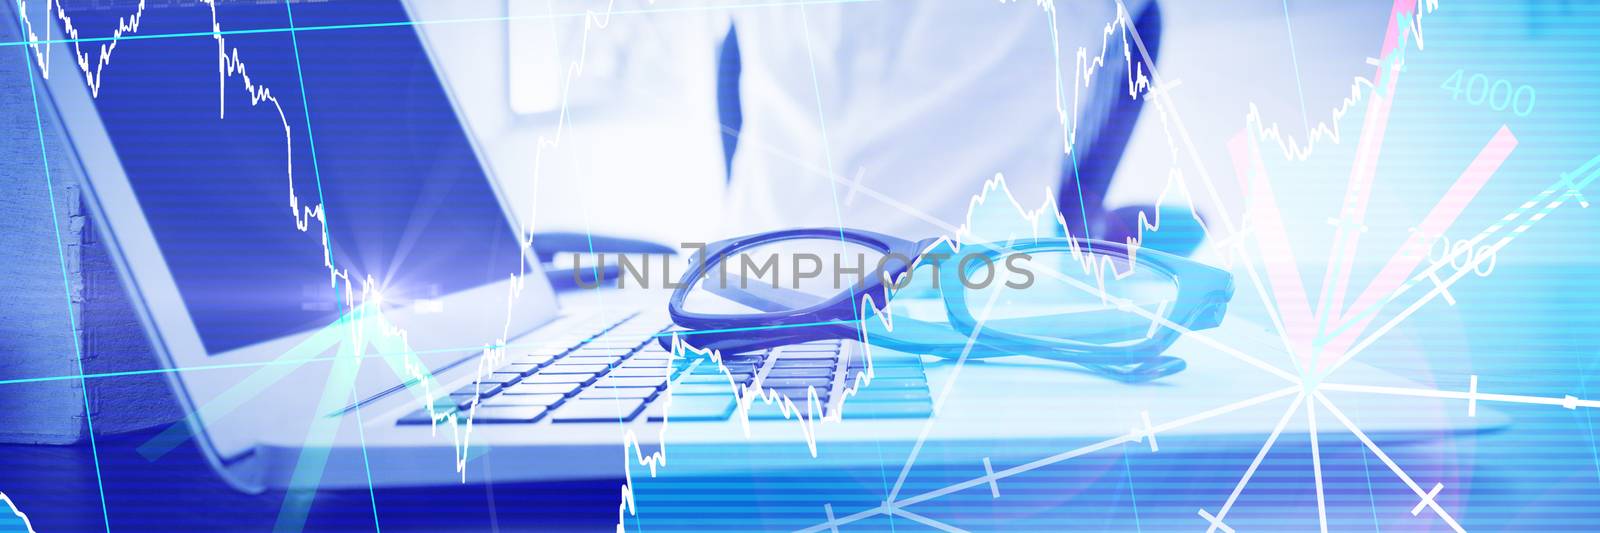 Composite image of stocks and shares by Wavebreakmedia